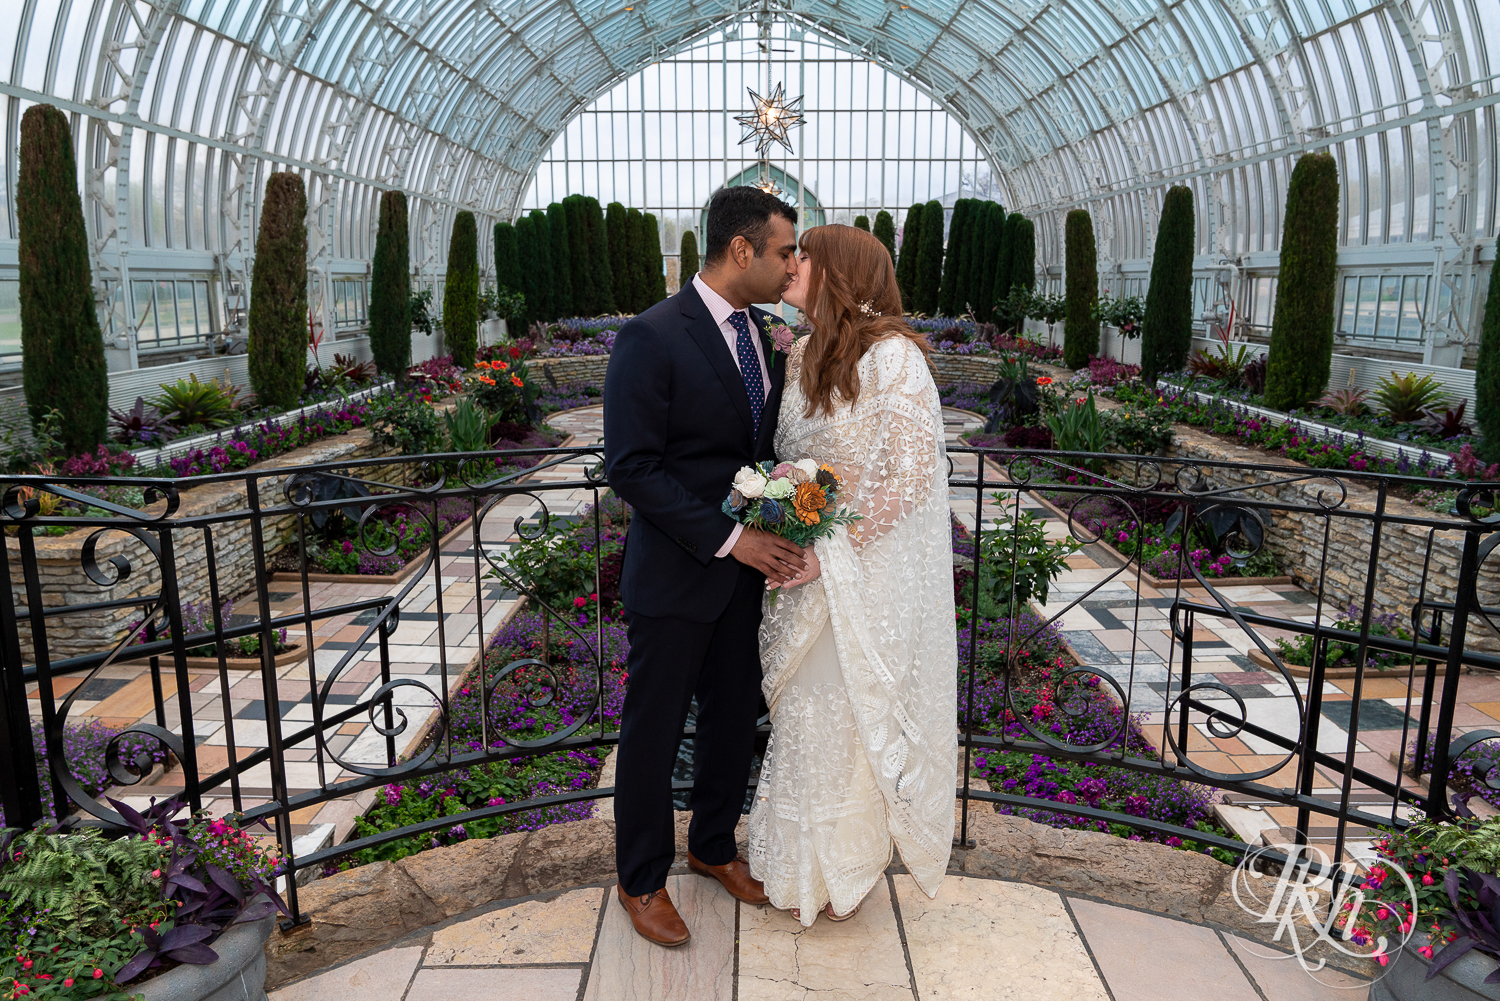 Bride and groom kiss at Indian wedding at Como Zoo Conservatory in Saint Paul, Minnesota.